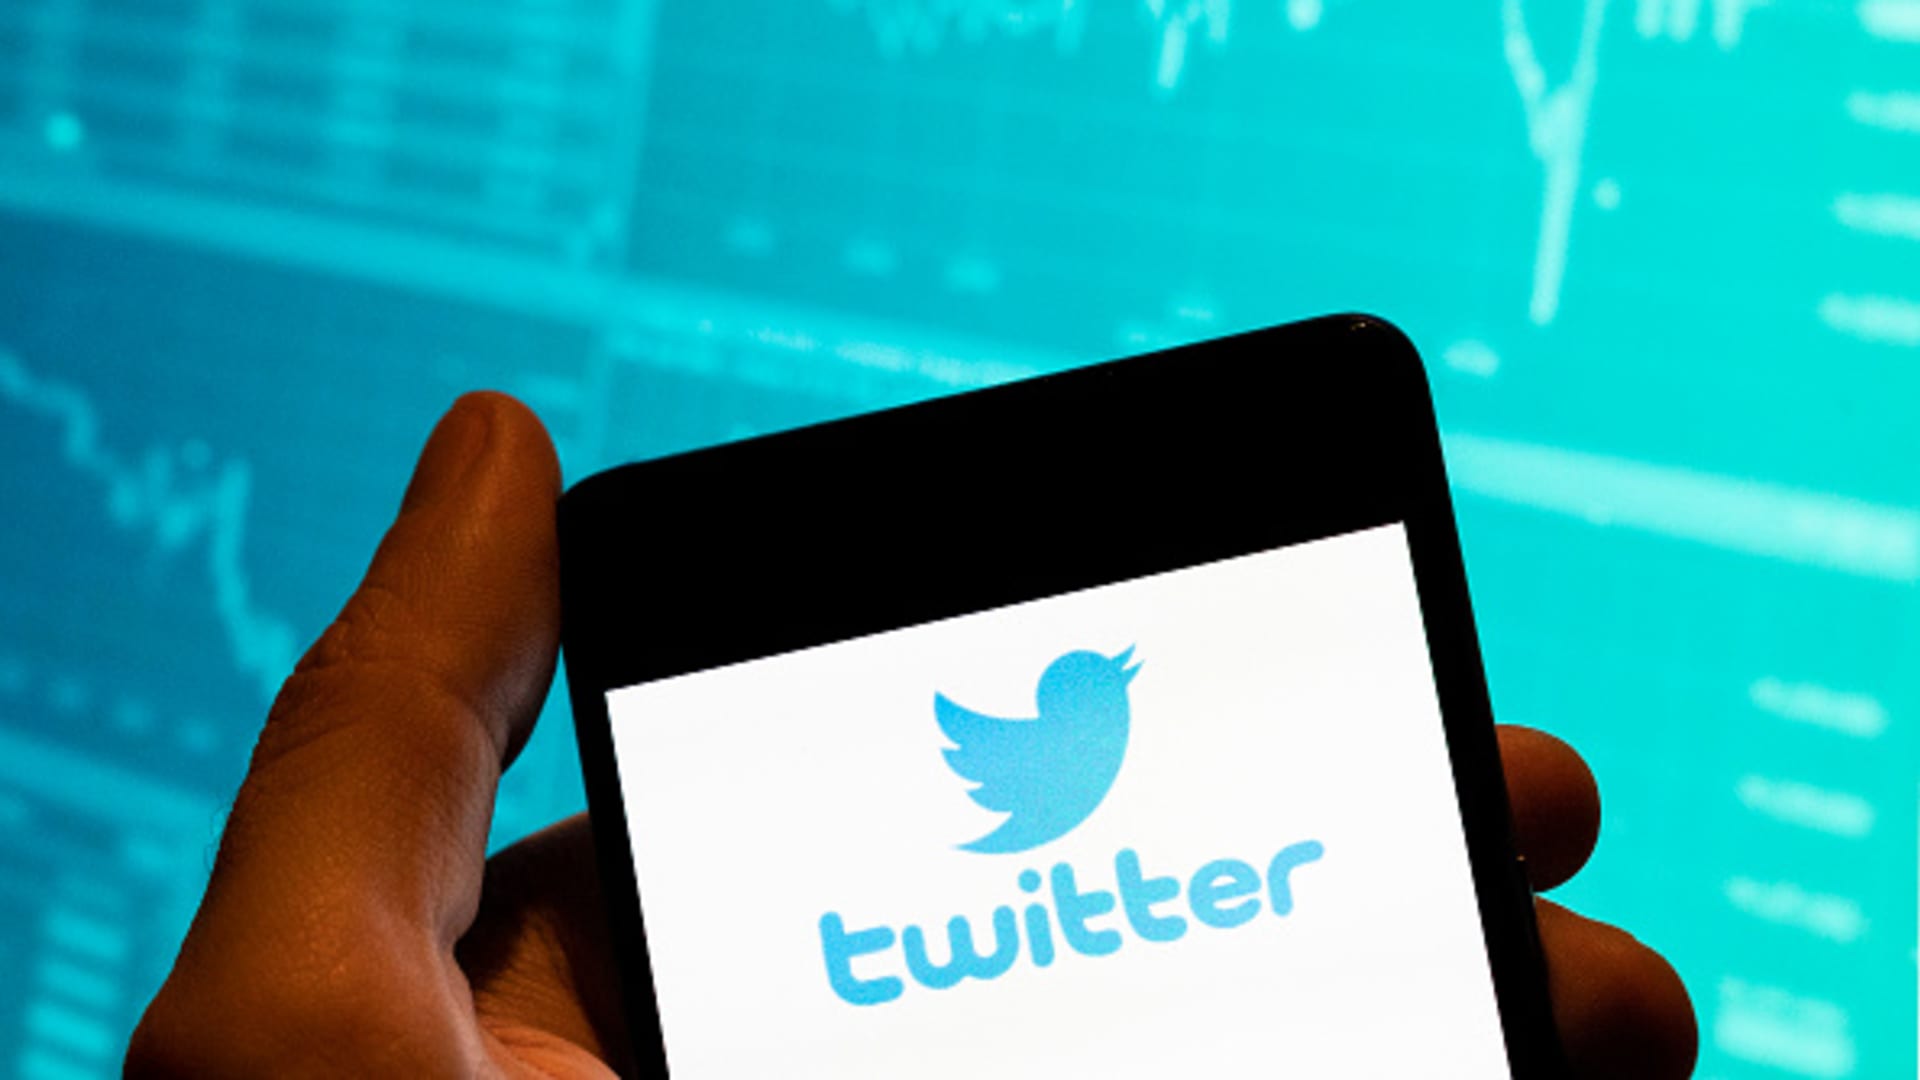 Twitter Said to Be Planning Bitcoin Payments as Tips on Its Platform